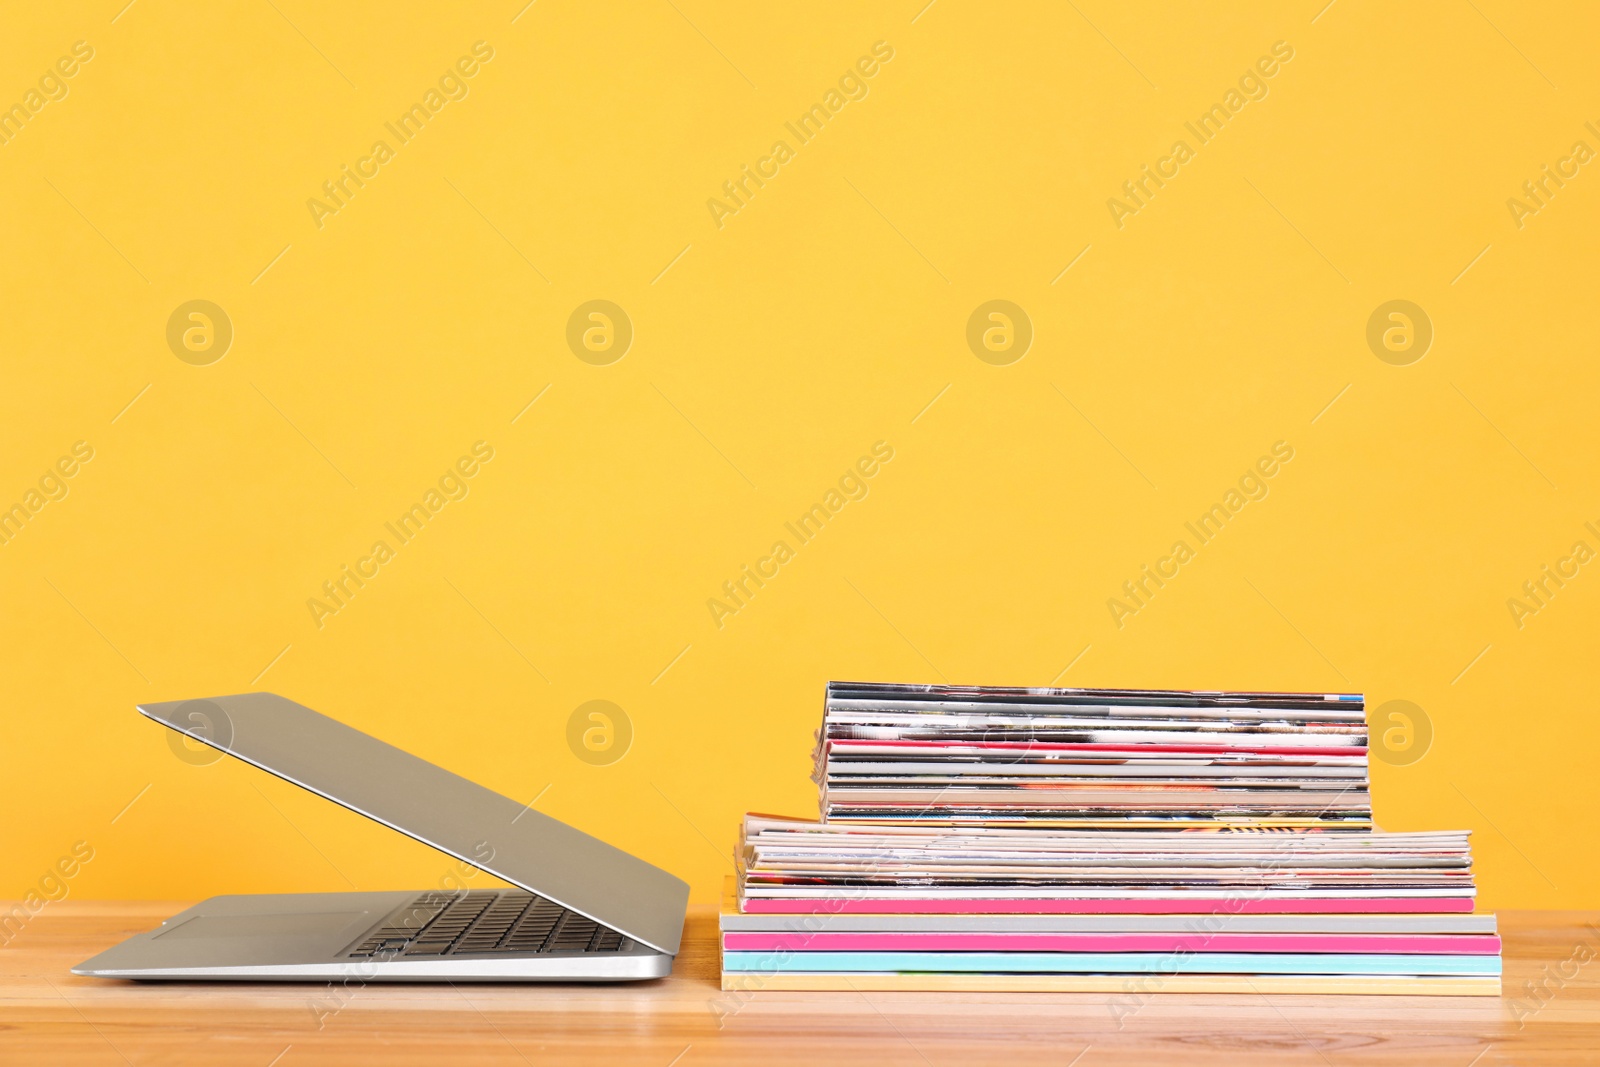 Photo of Laptop and stack of magazines on wooden table